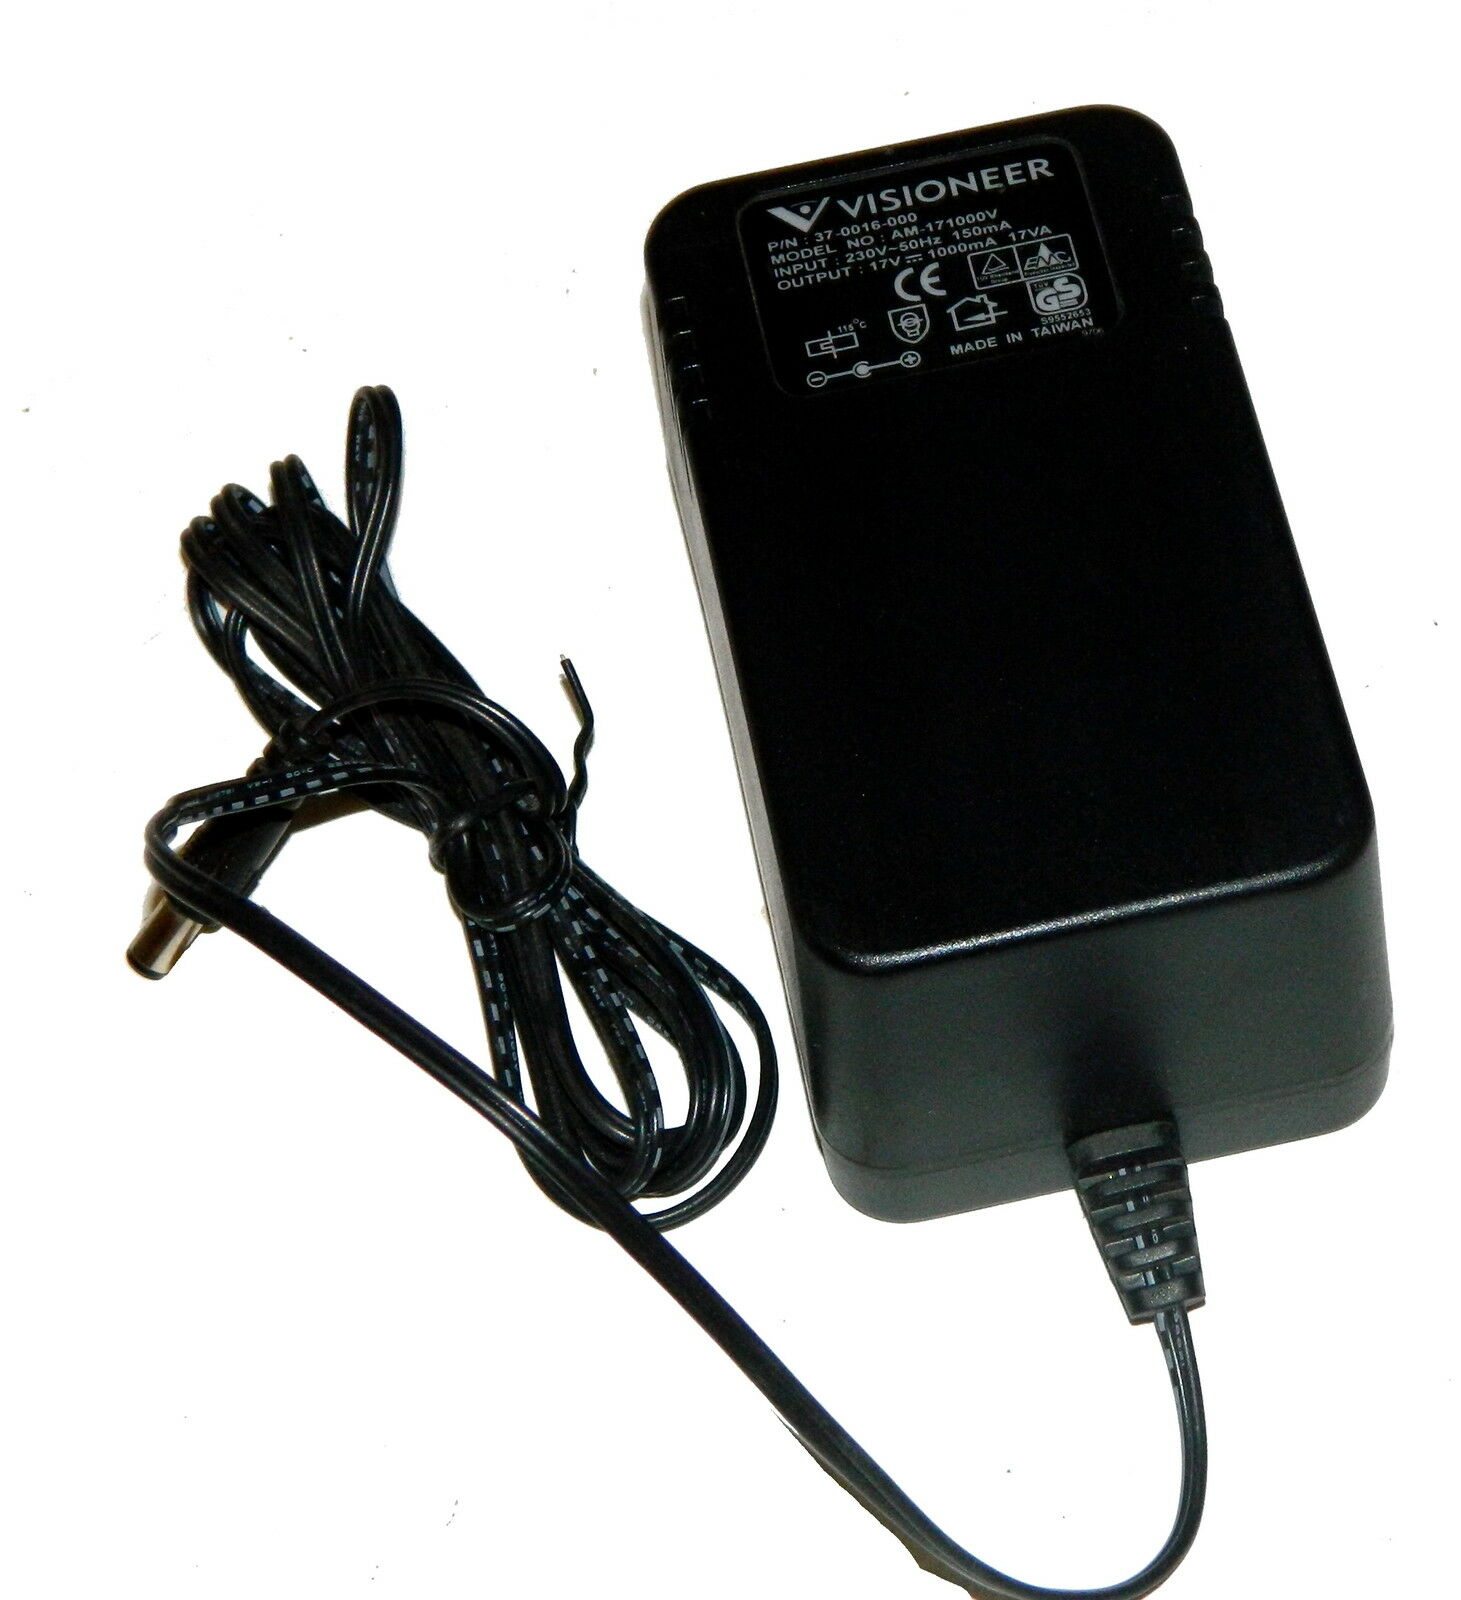 NEW Visioneer 37-0016-000 17VDC 1.0A AM-171000V AC Adapter